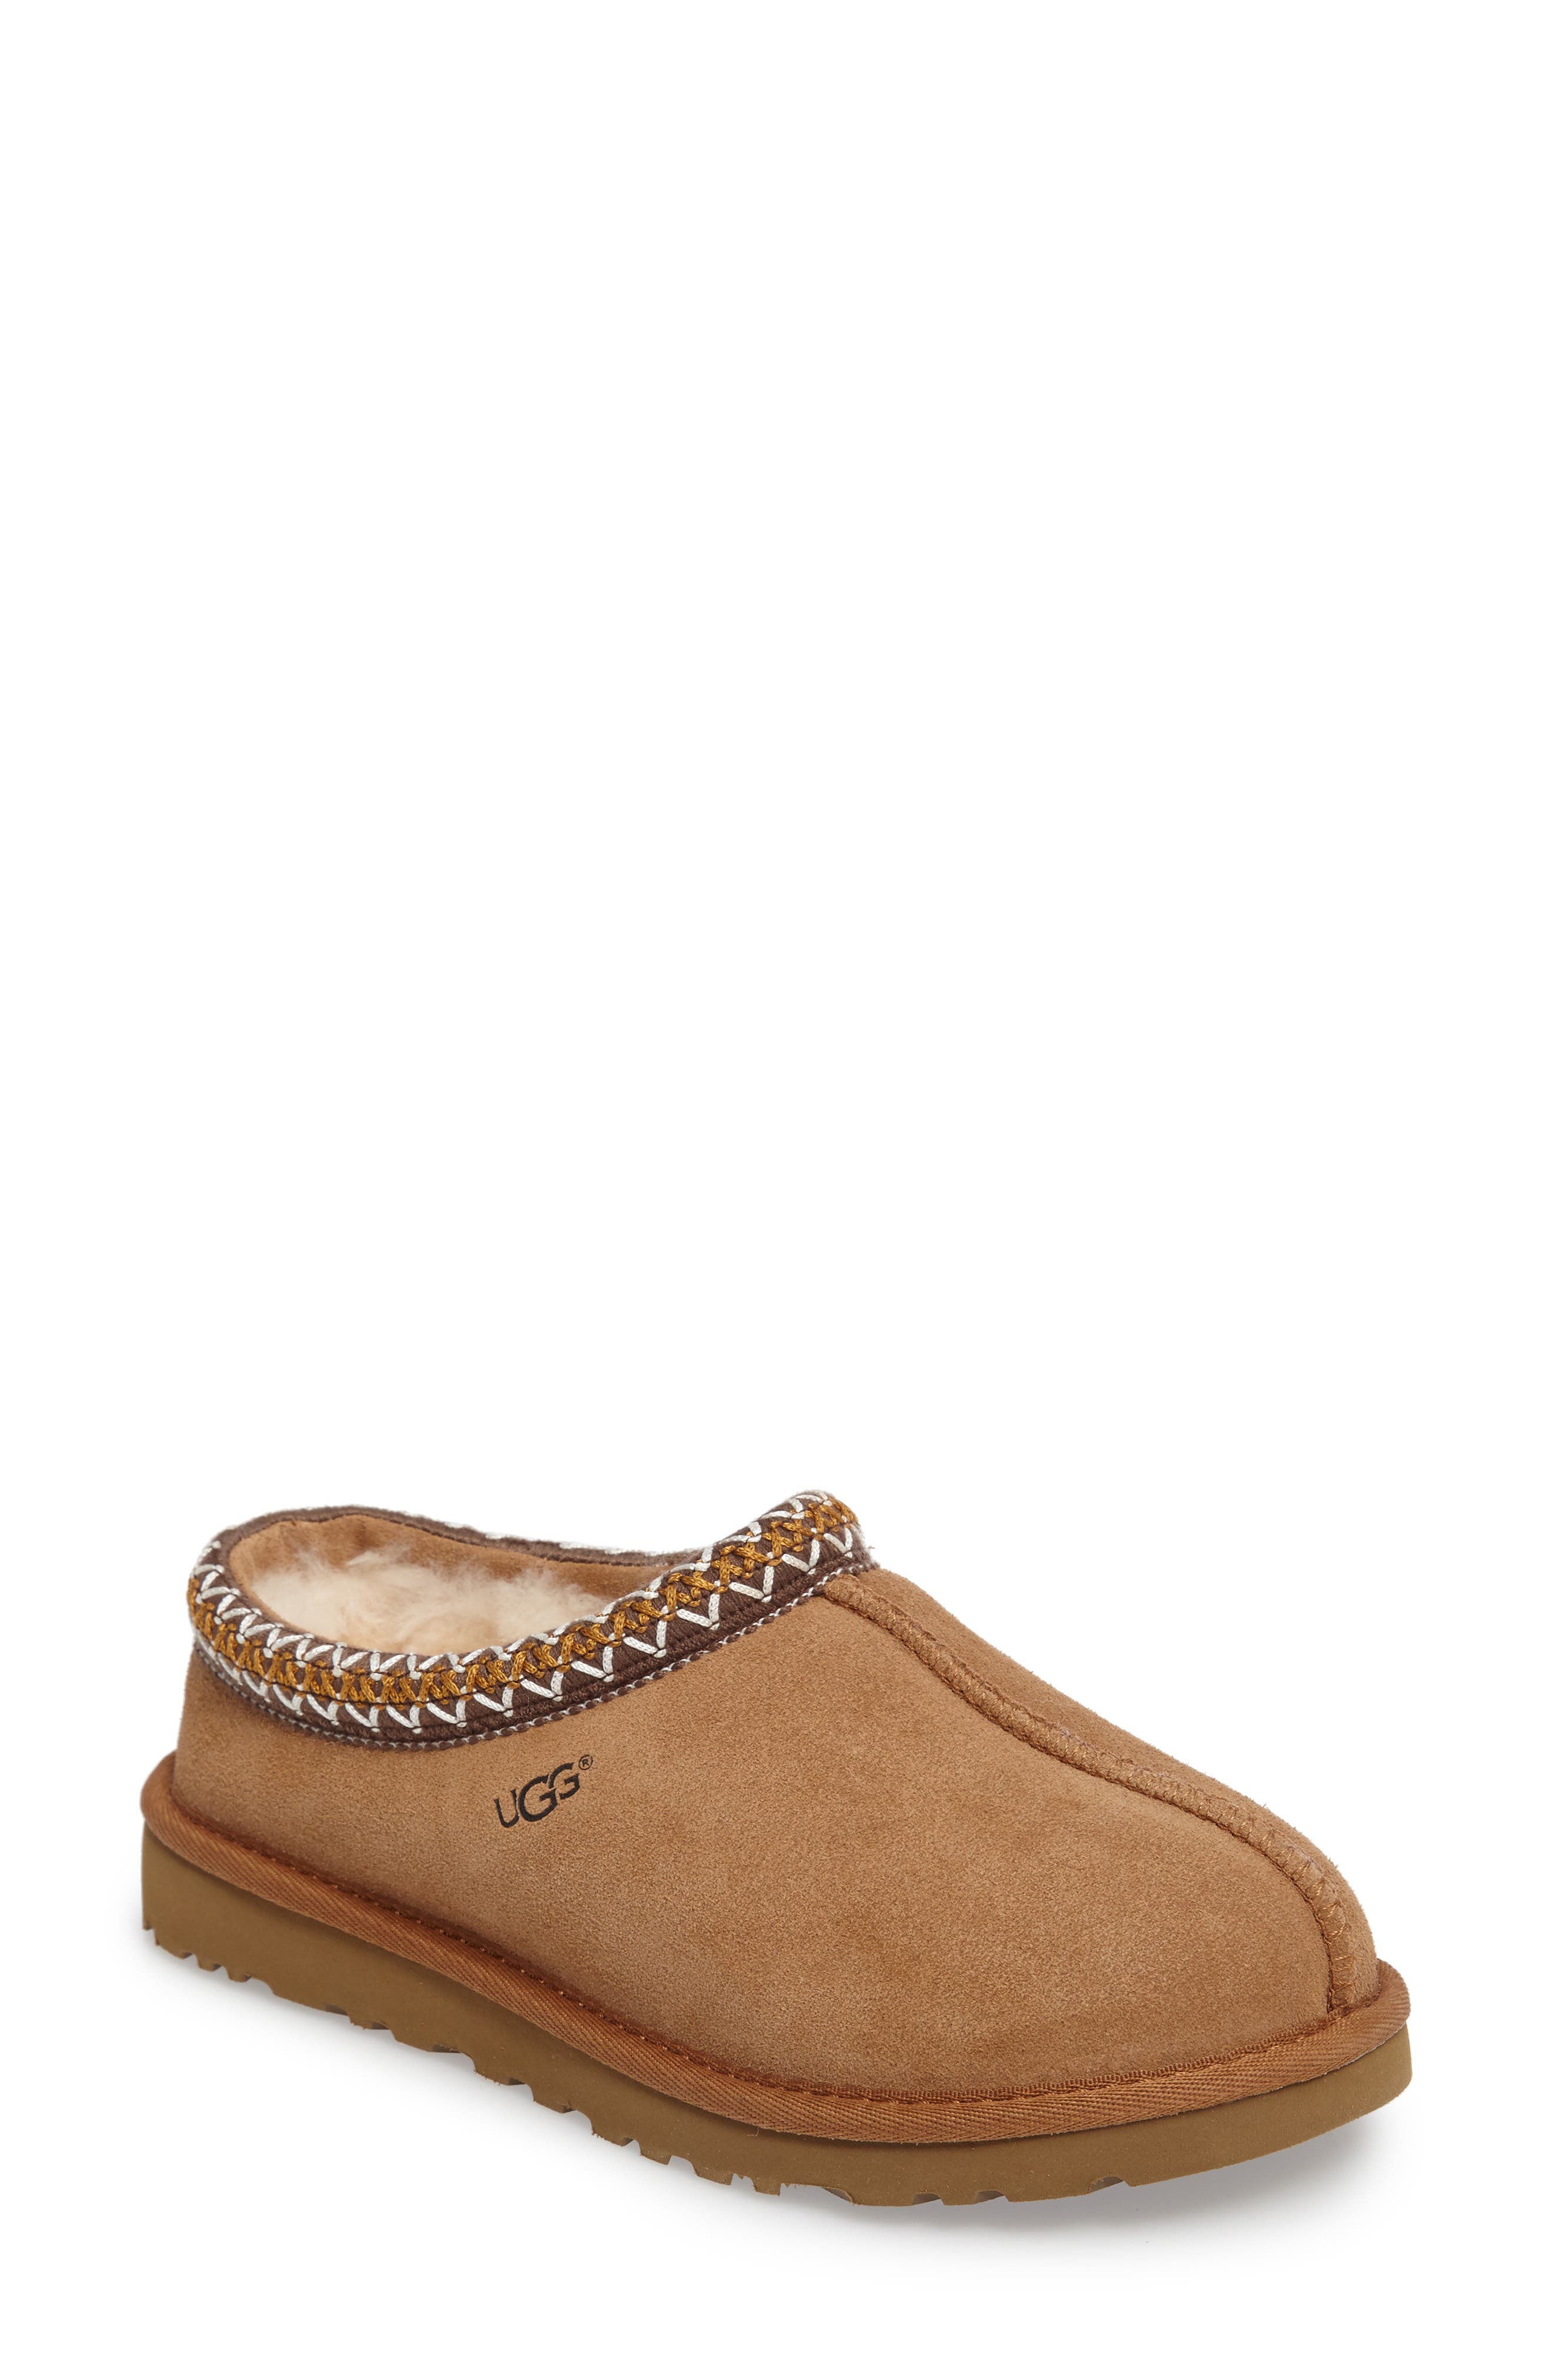 ugg clogs for women